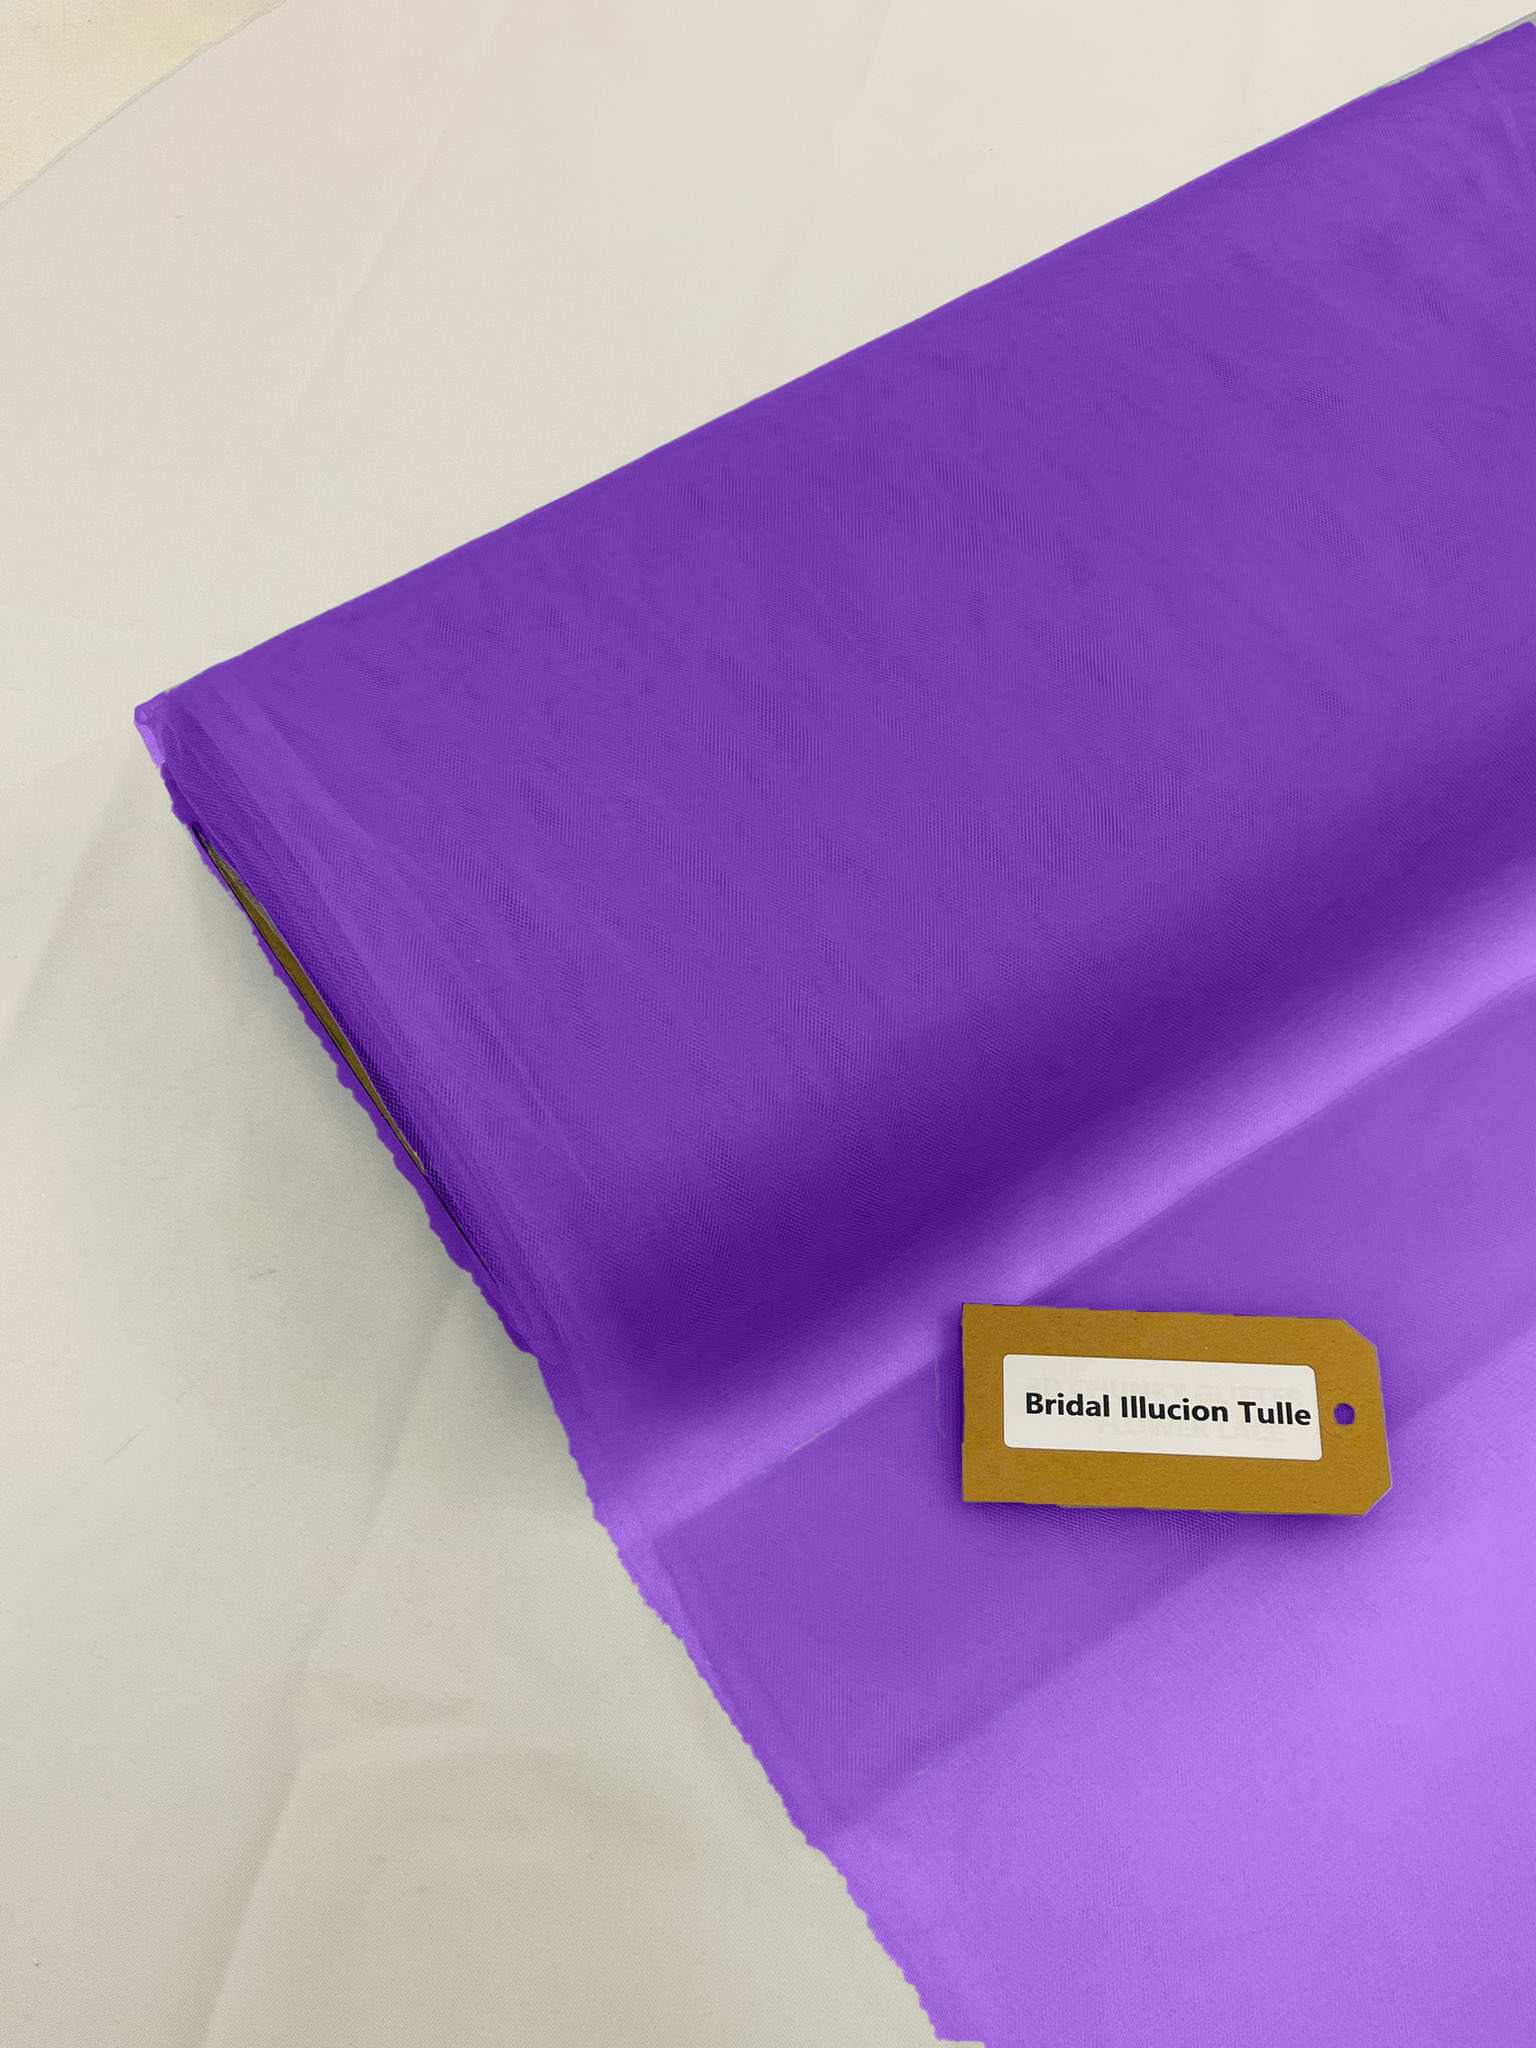 Purple - Bridal Illusion Tulle 108"Wide Polyester Premium Tulle Fabric Bolt, By The Roll.